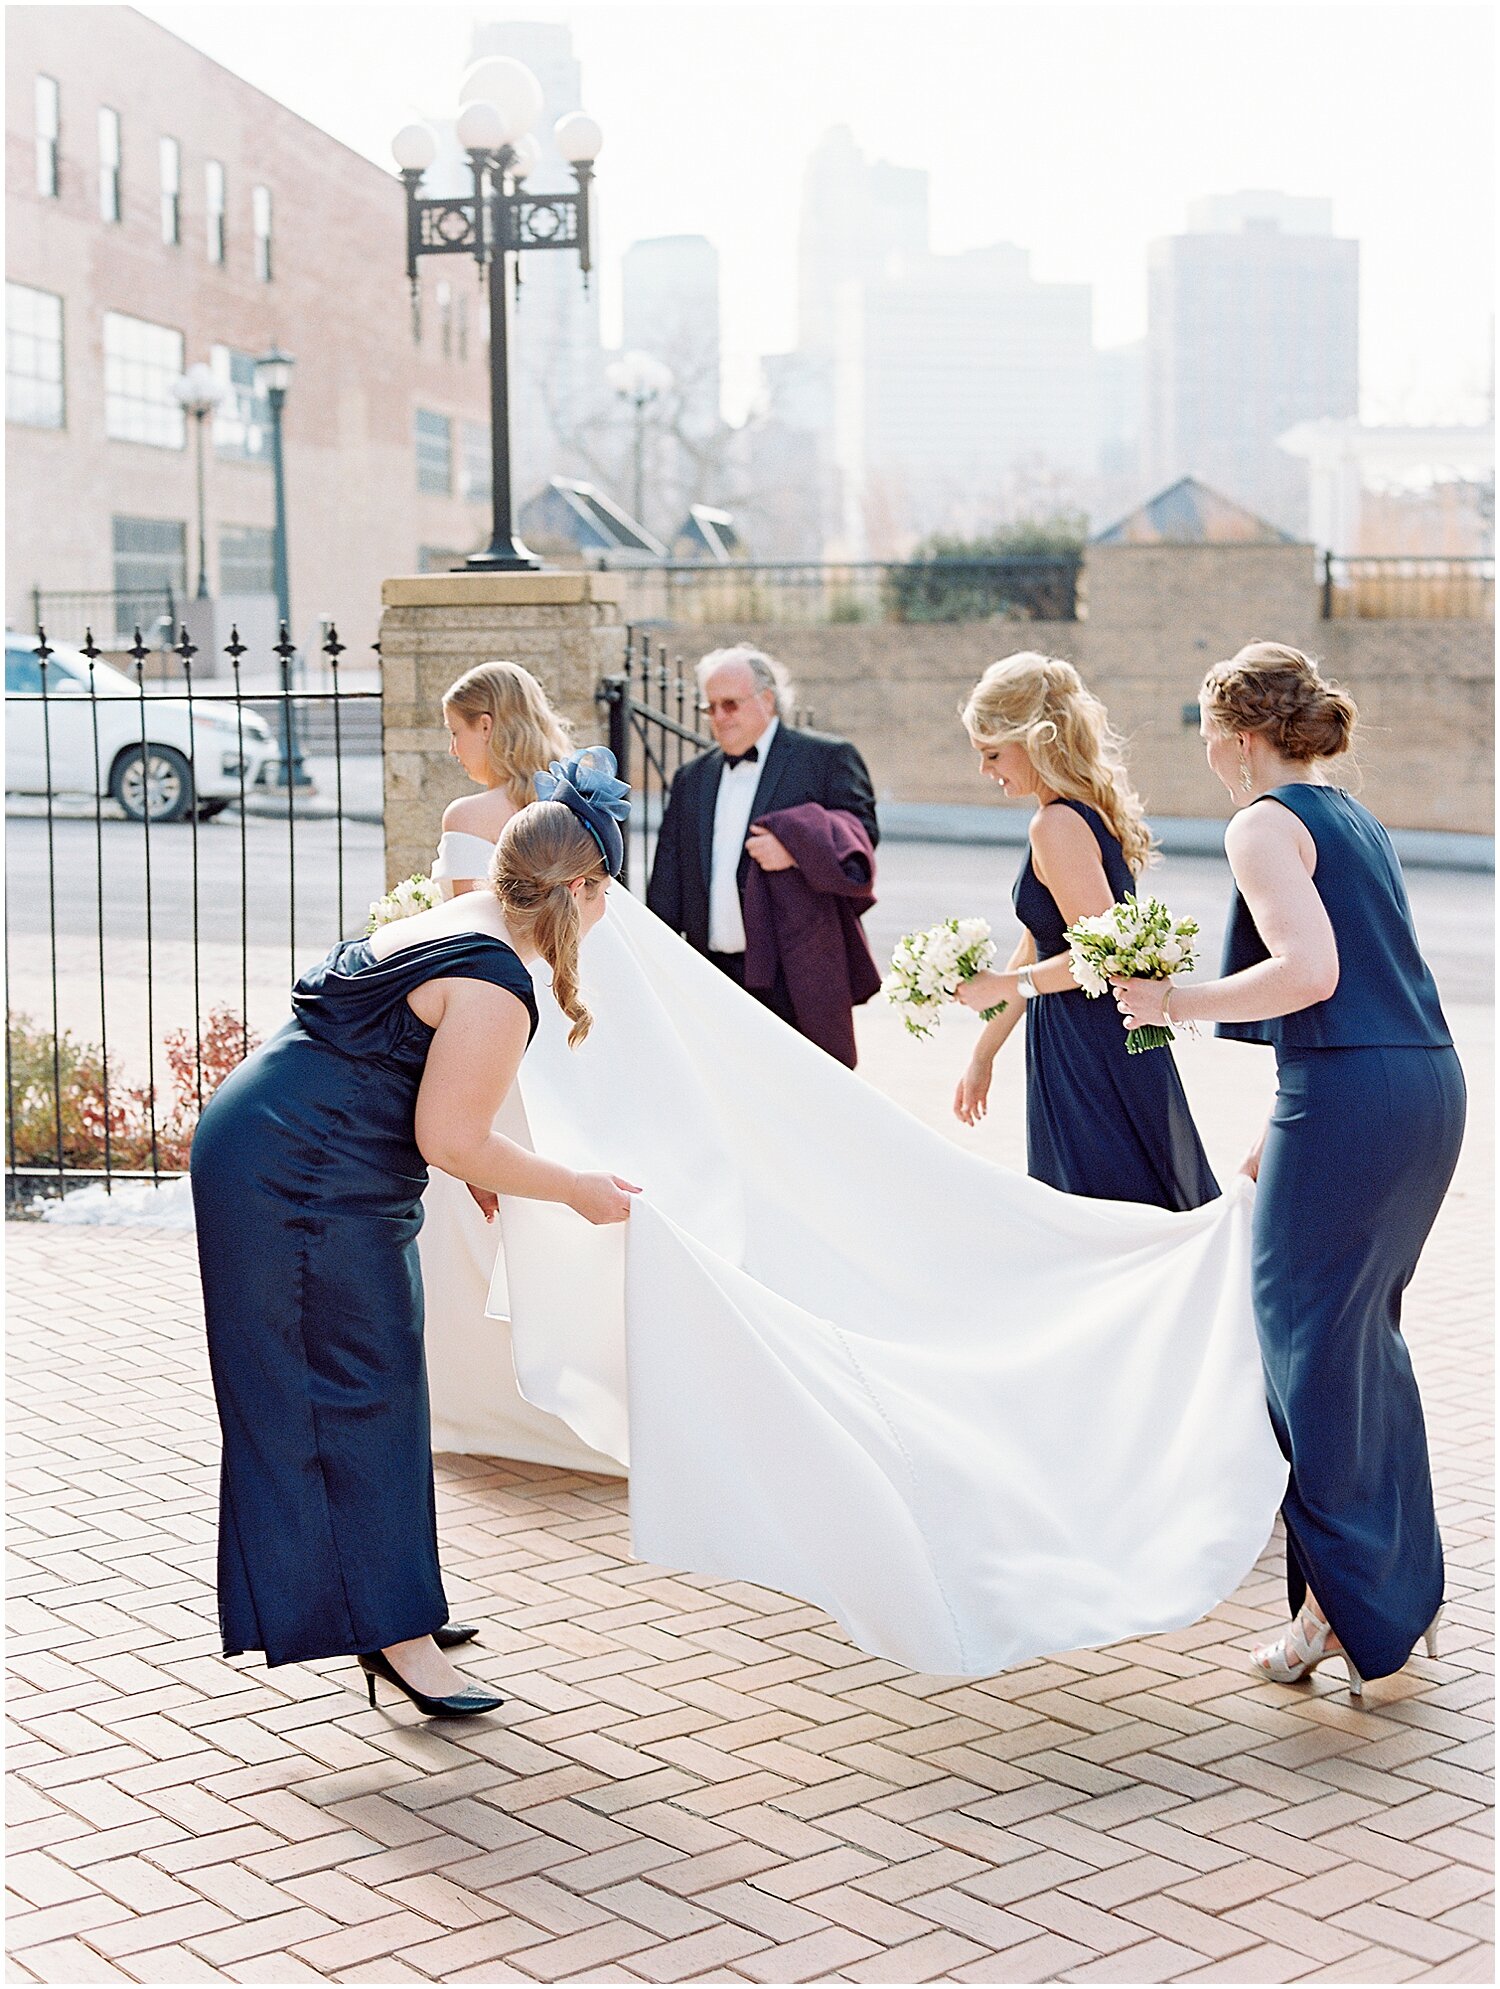  bridesmaids helping the bride with her wedding dress 